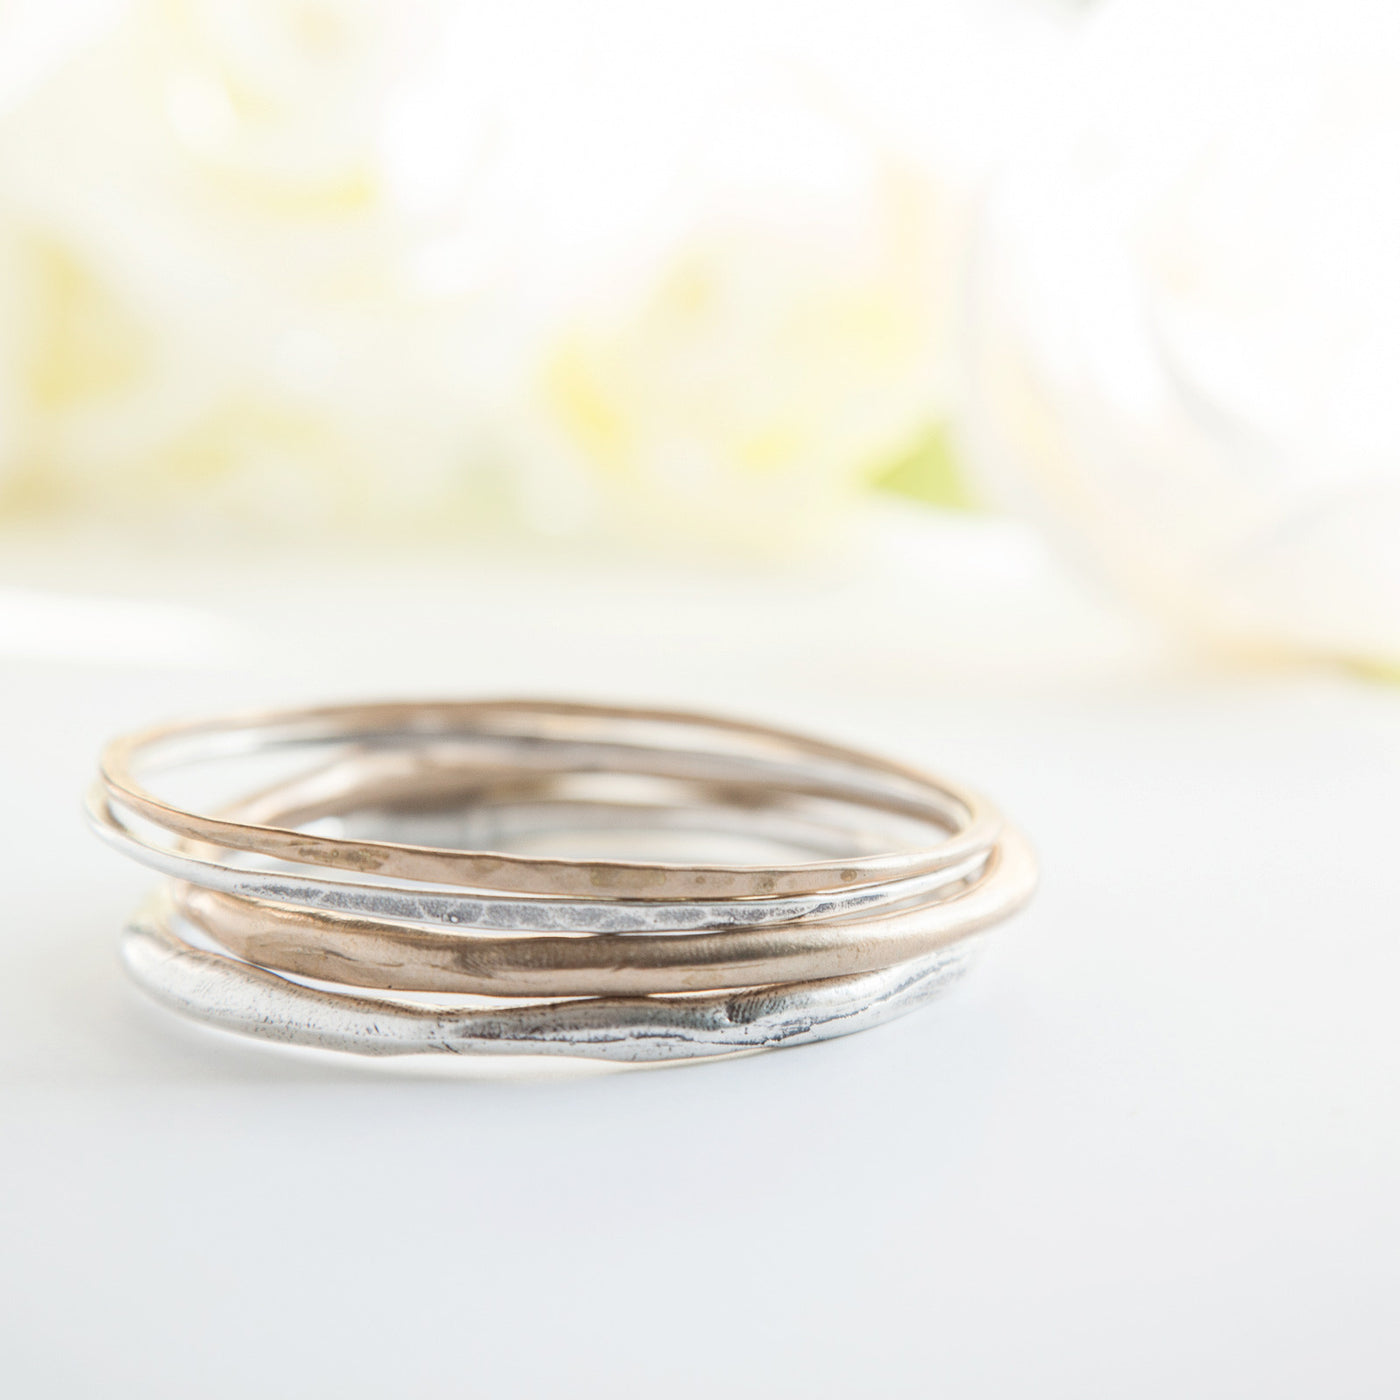 American-Jewelry-Handcrafted-Oval-Bangles-bracelet-silver-bronze